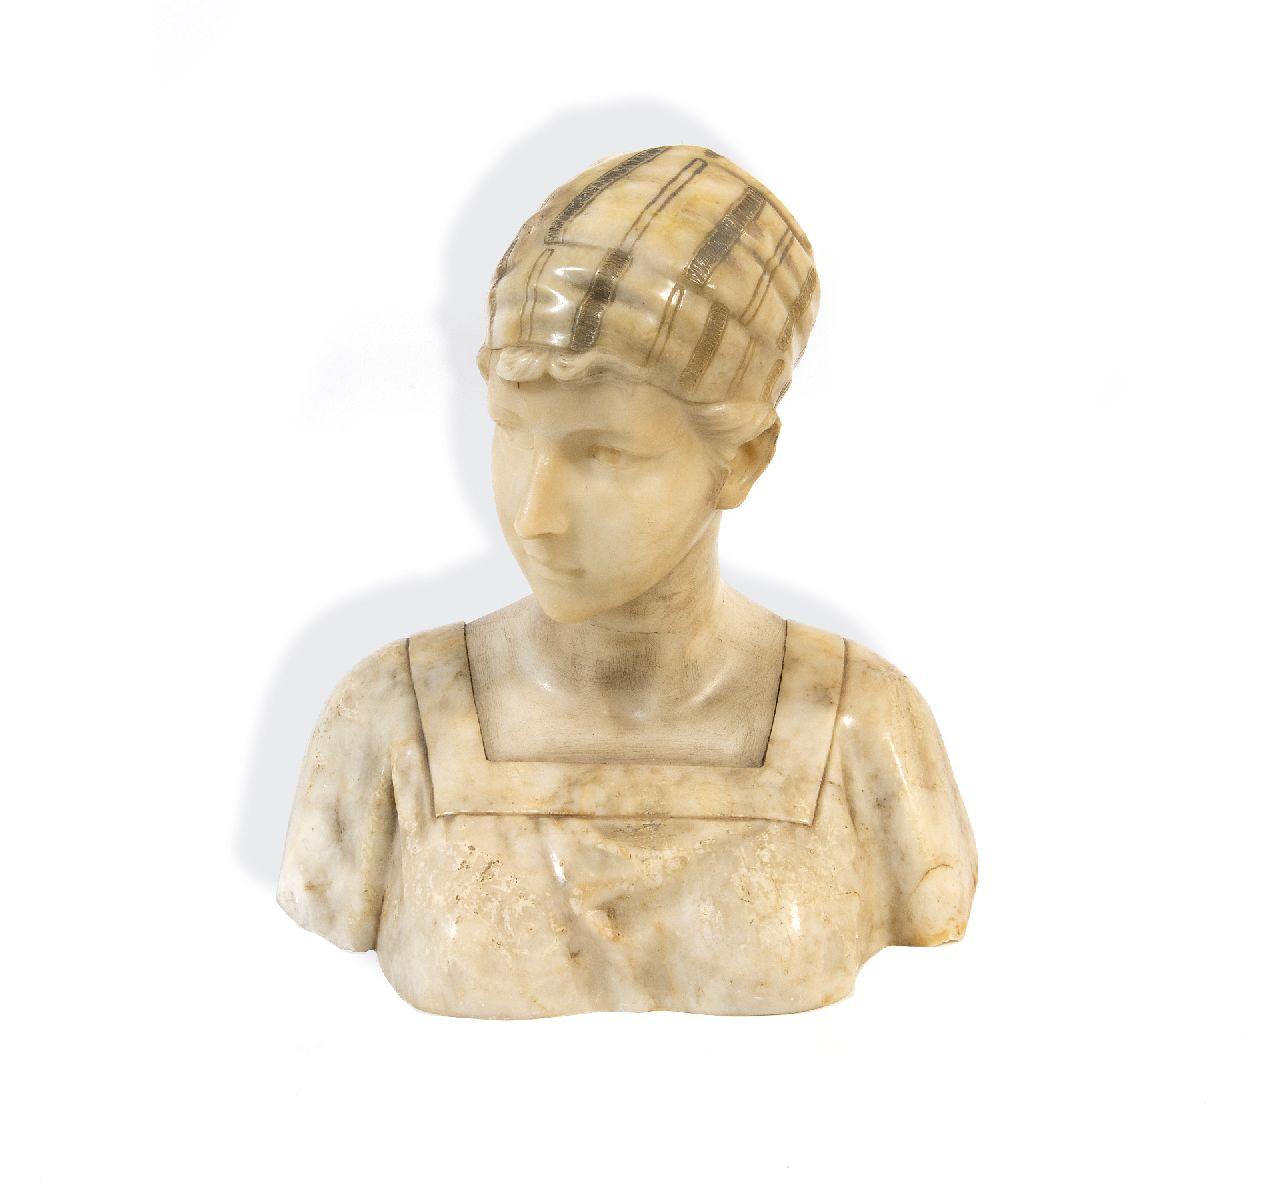 Aurili R.  | Richard Aurili | Sculptures and objects offered for sale | Portrait bust of a young woman, marble 41.0 cm, signed on the back edge